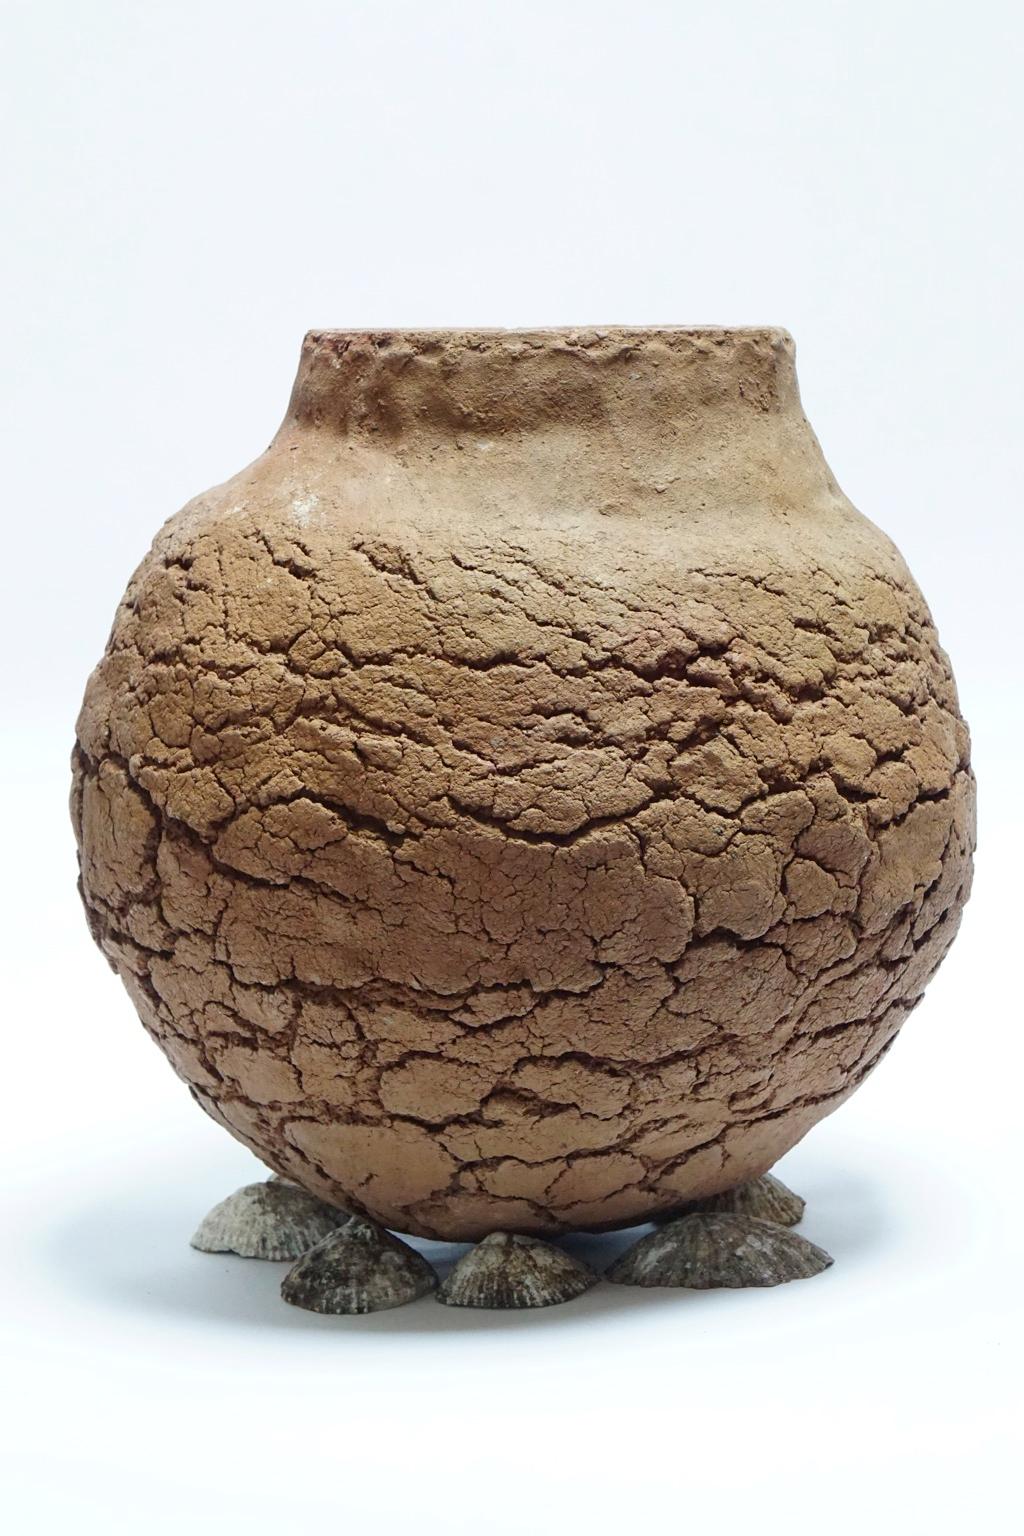 This is a completely handmade vase by artist Joaquin Reyes from the Canary Islands (Spain). He does not use any moulds or wheels; he moulds local volcanic clay with his own hands and put it in a wood kiln. Mr. Reyes started with Primitive Canarian